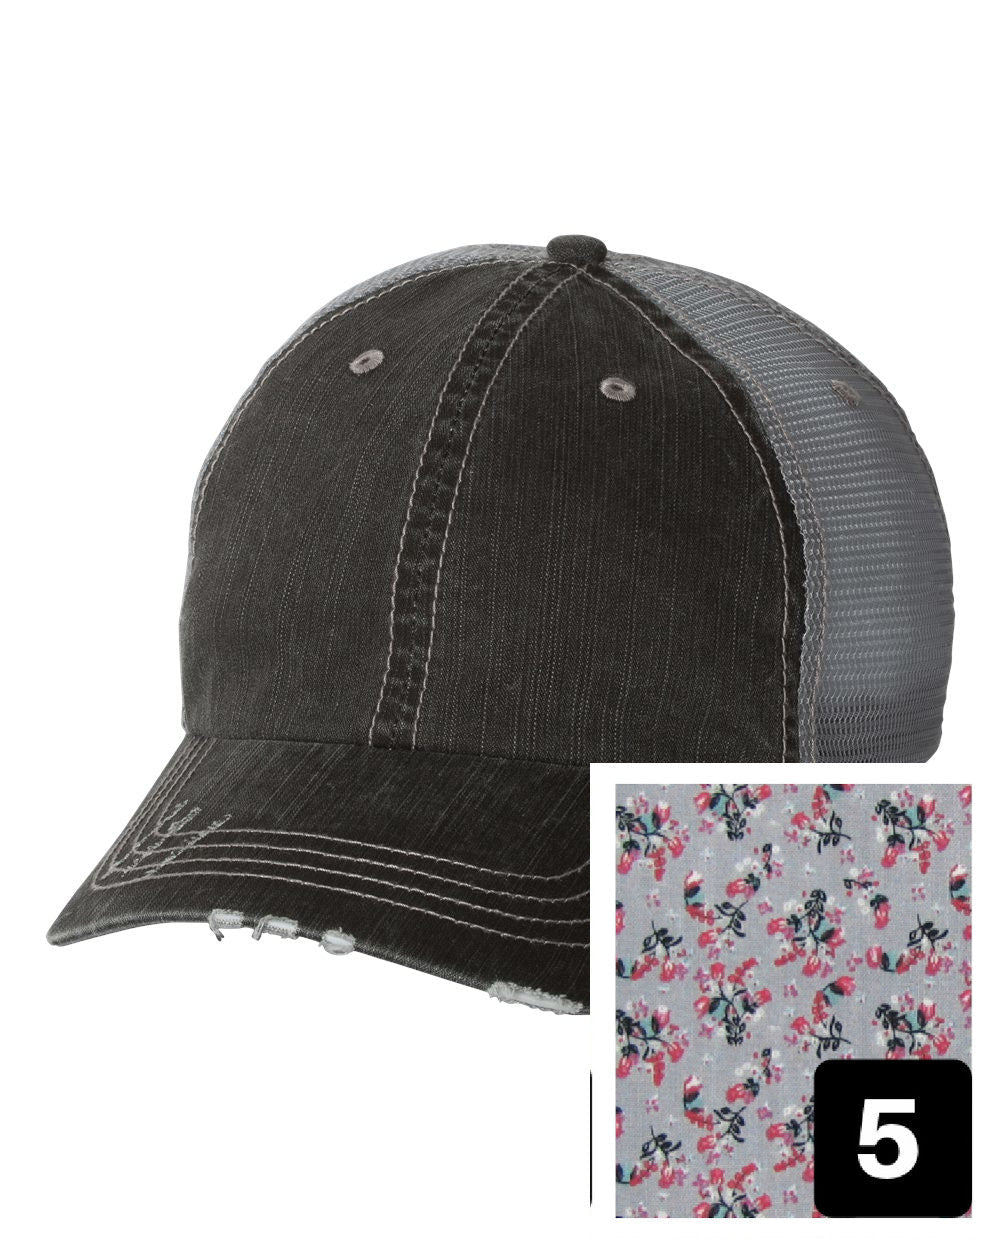 gray distressed trucker hat with purple and pink floral fabric state of Kansas